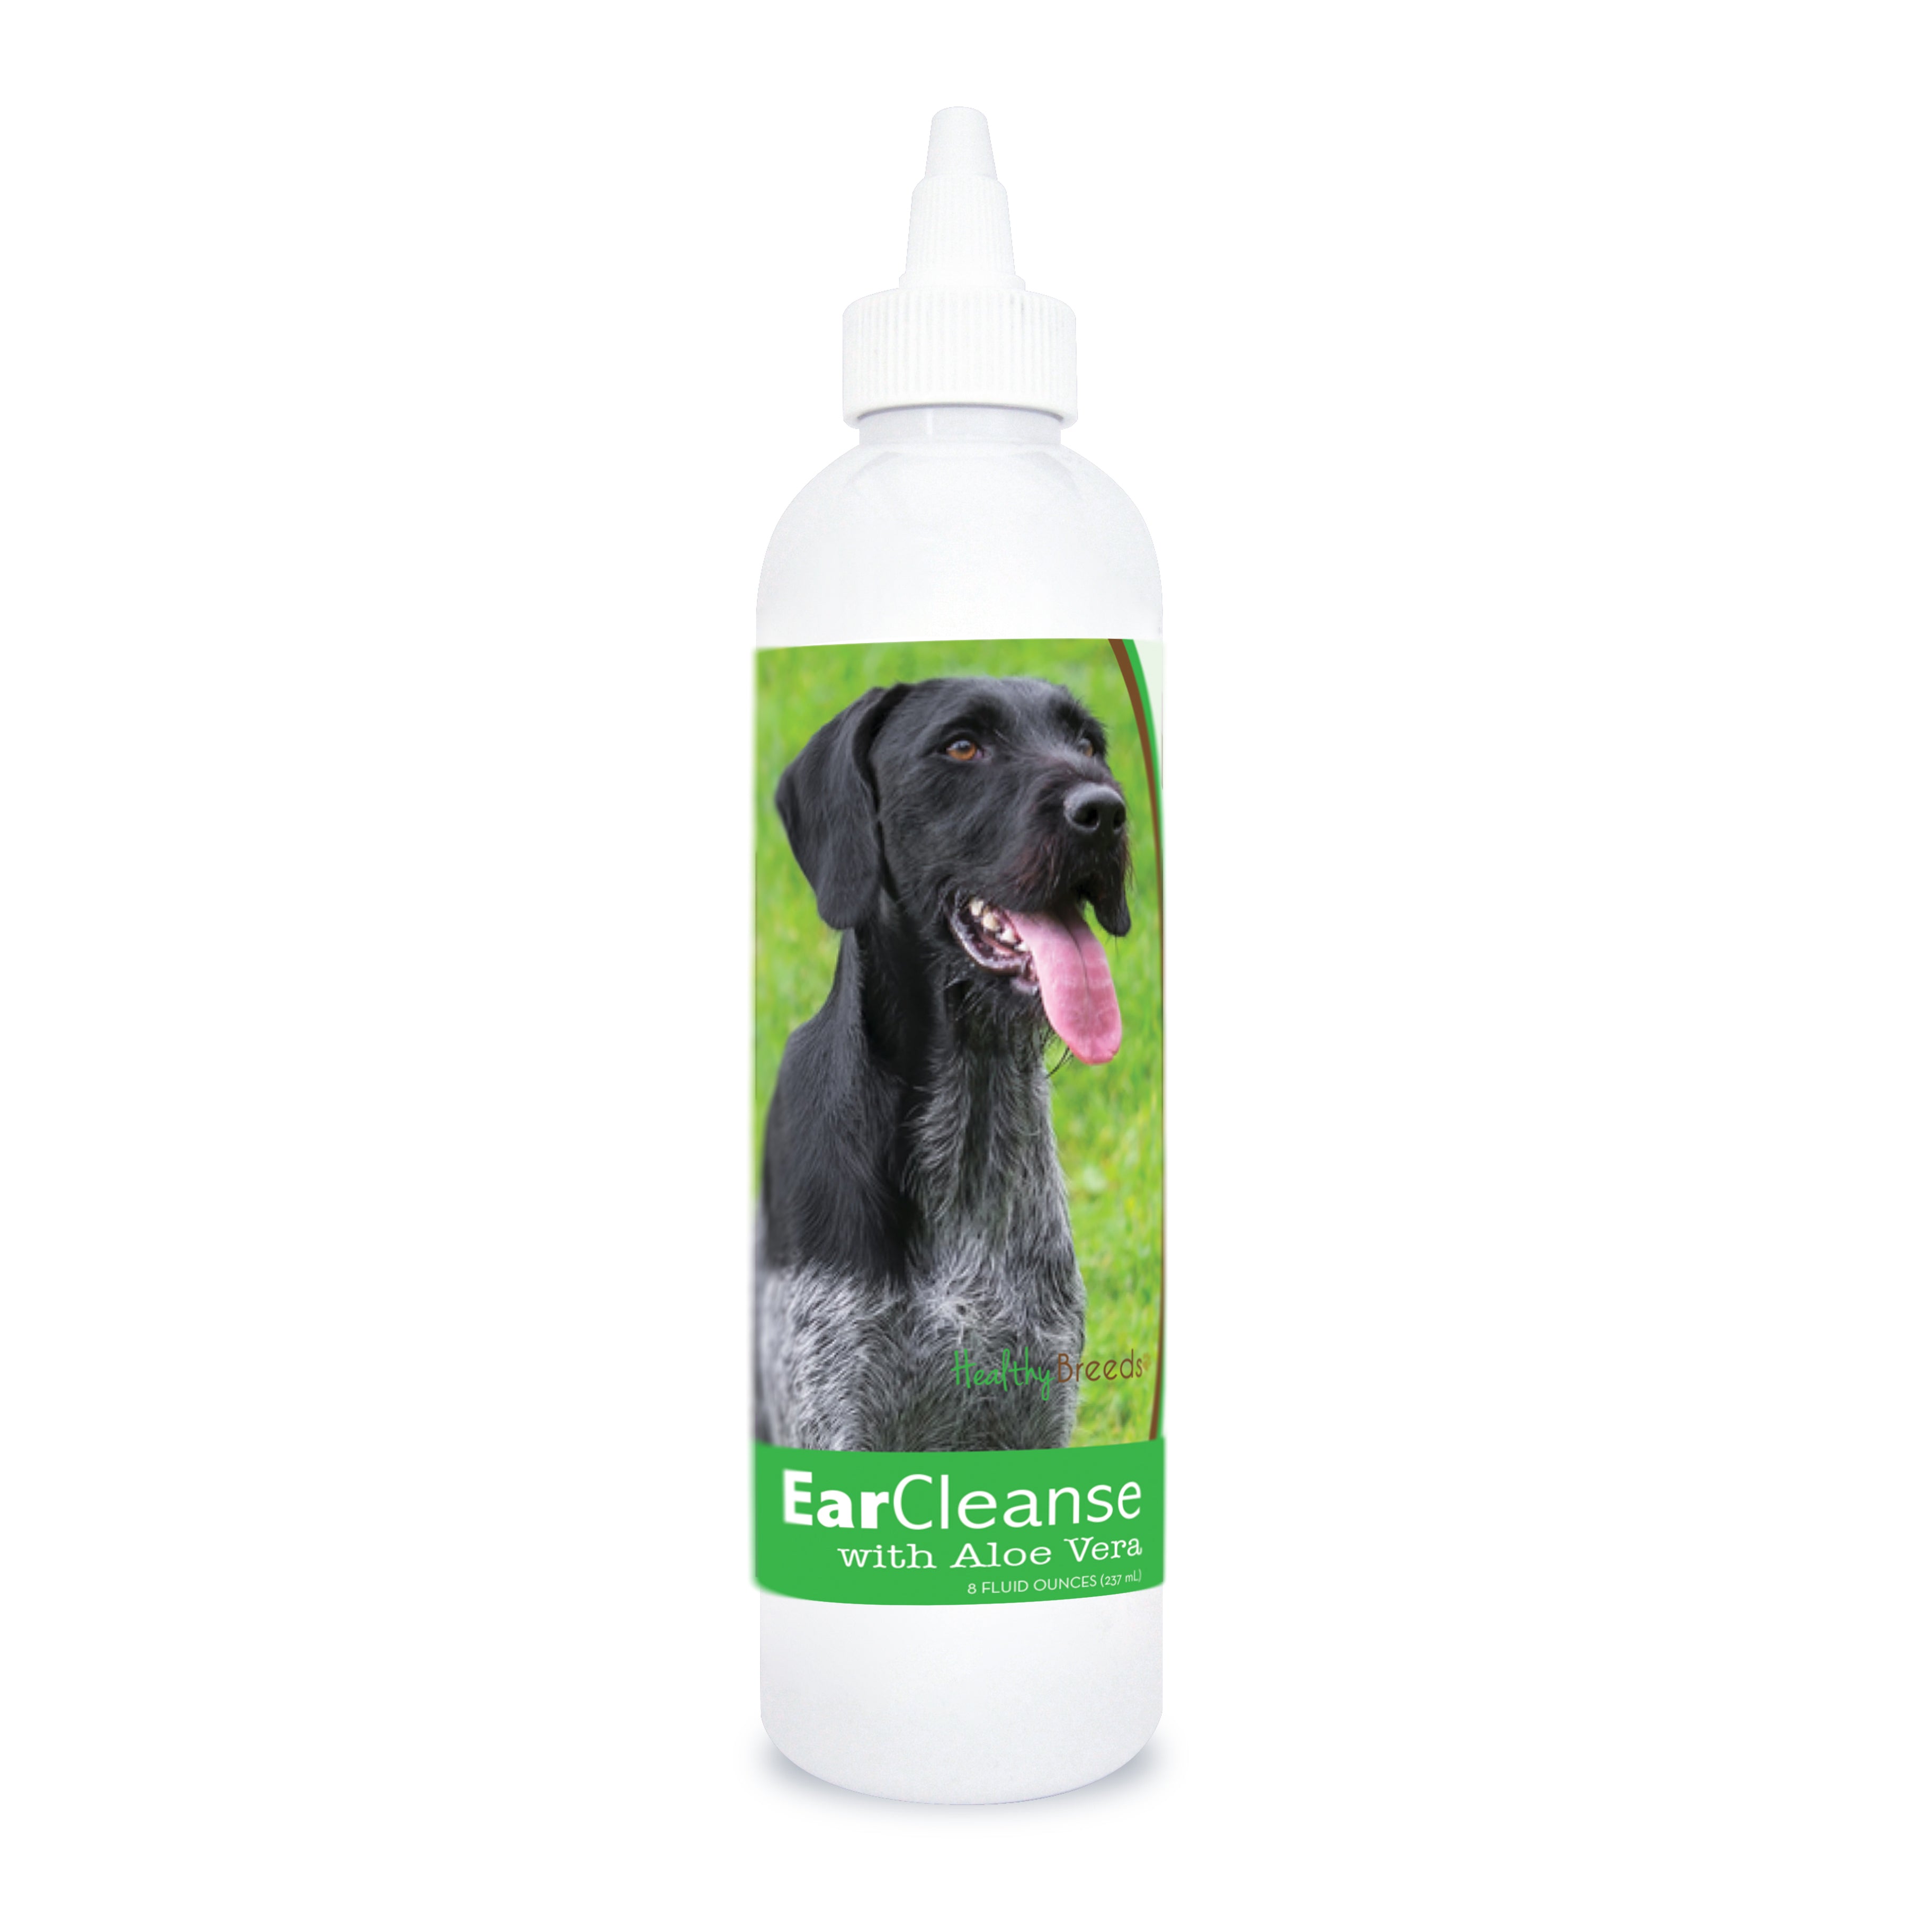 German Wirehaired Pointer Ear Cleanse with Aloe Vera Cucumber Melon 8 oz